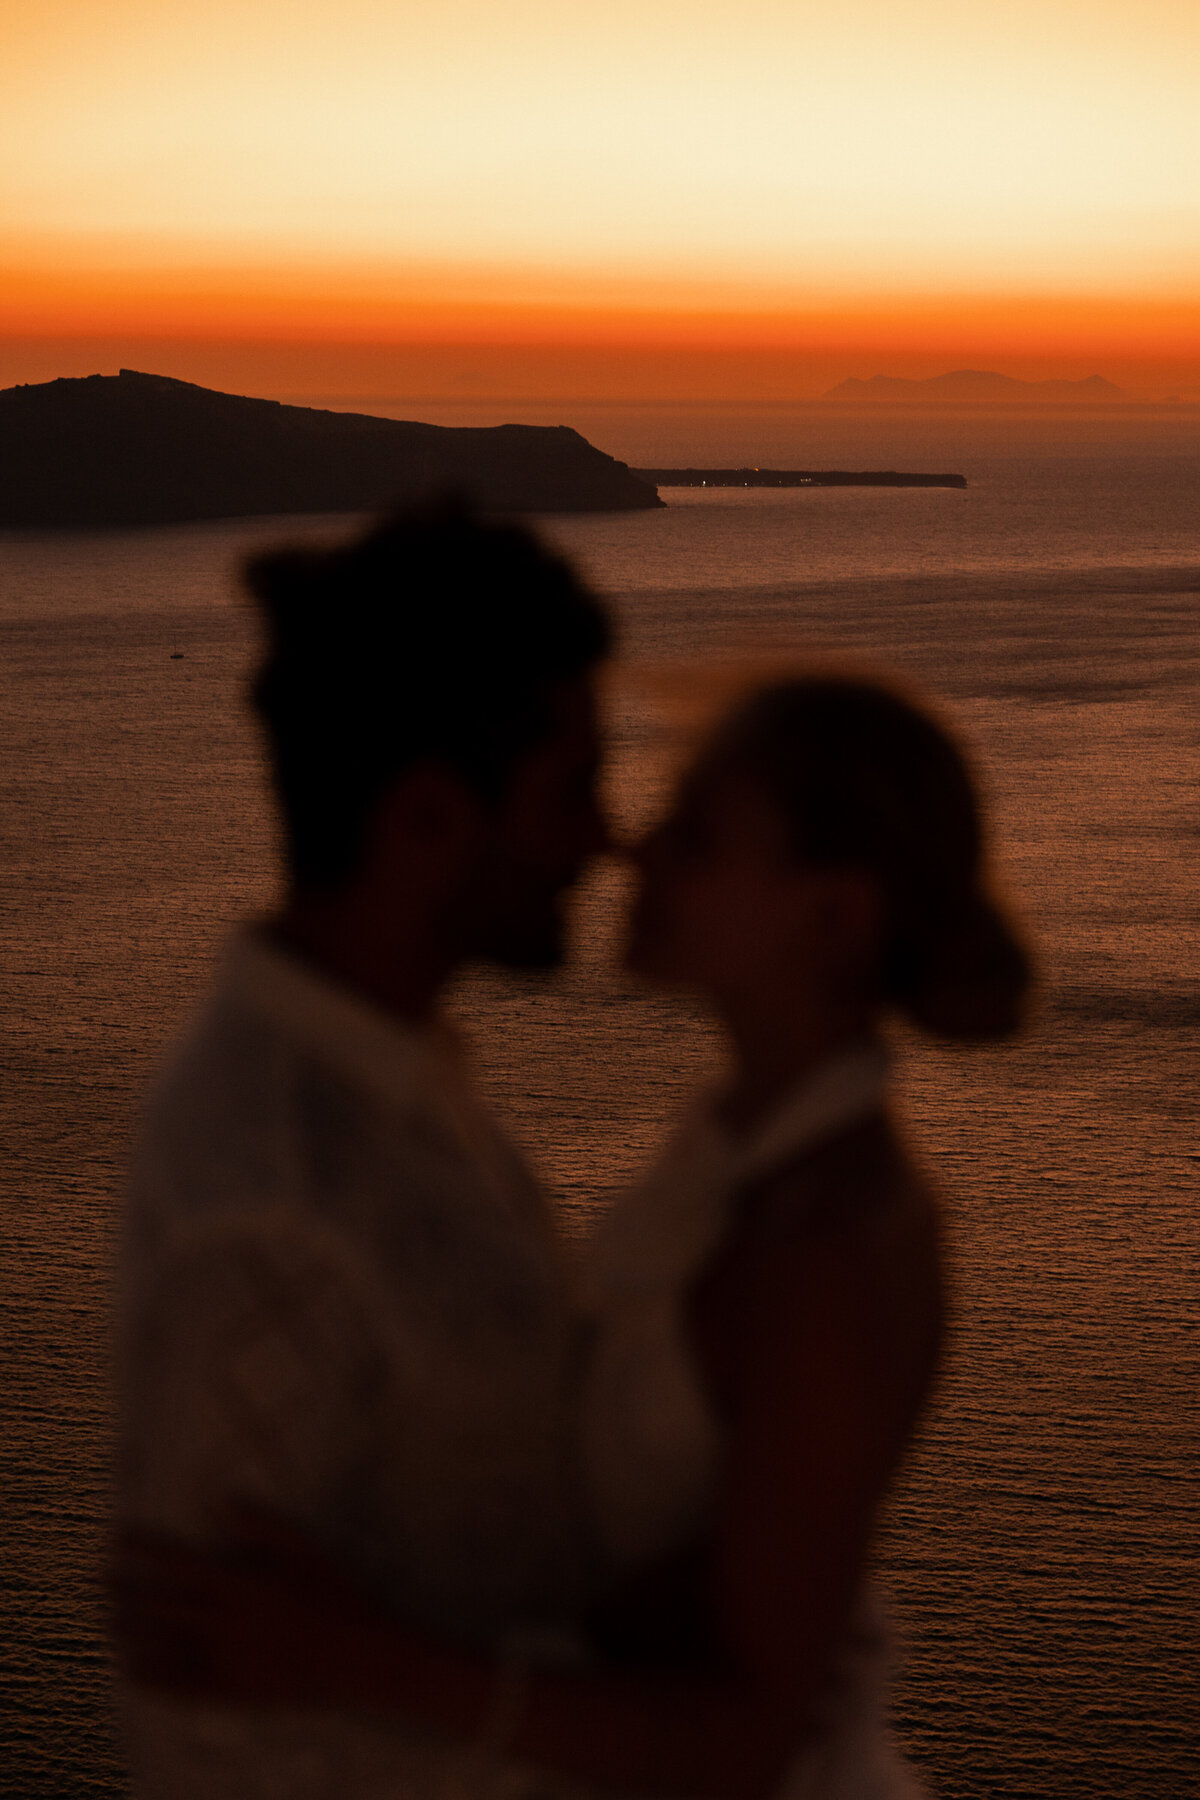 santorini-greece-cathedral-elopement-blue-dome-romantic-timeless-sunset-europe-533